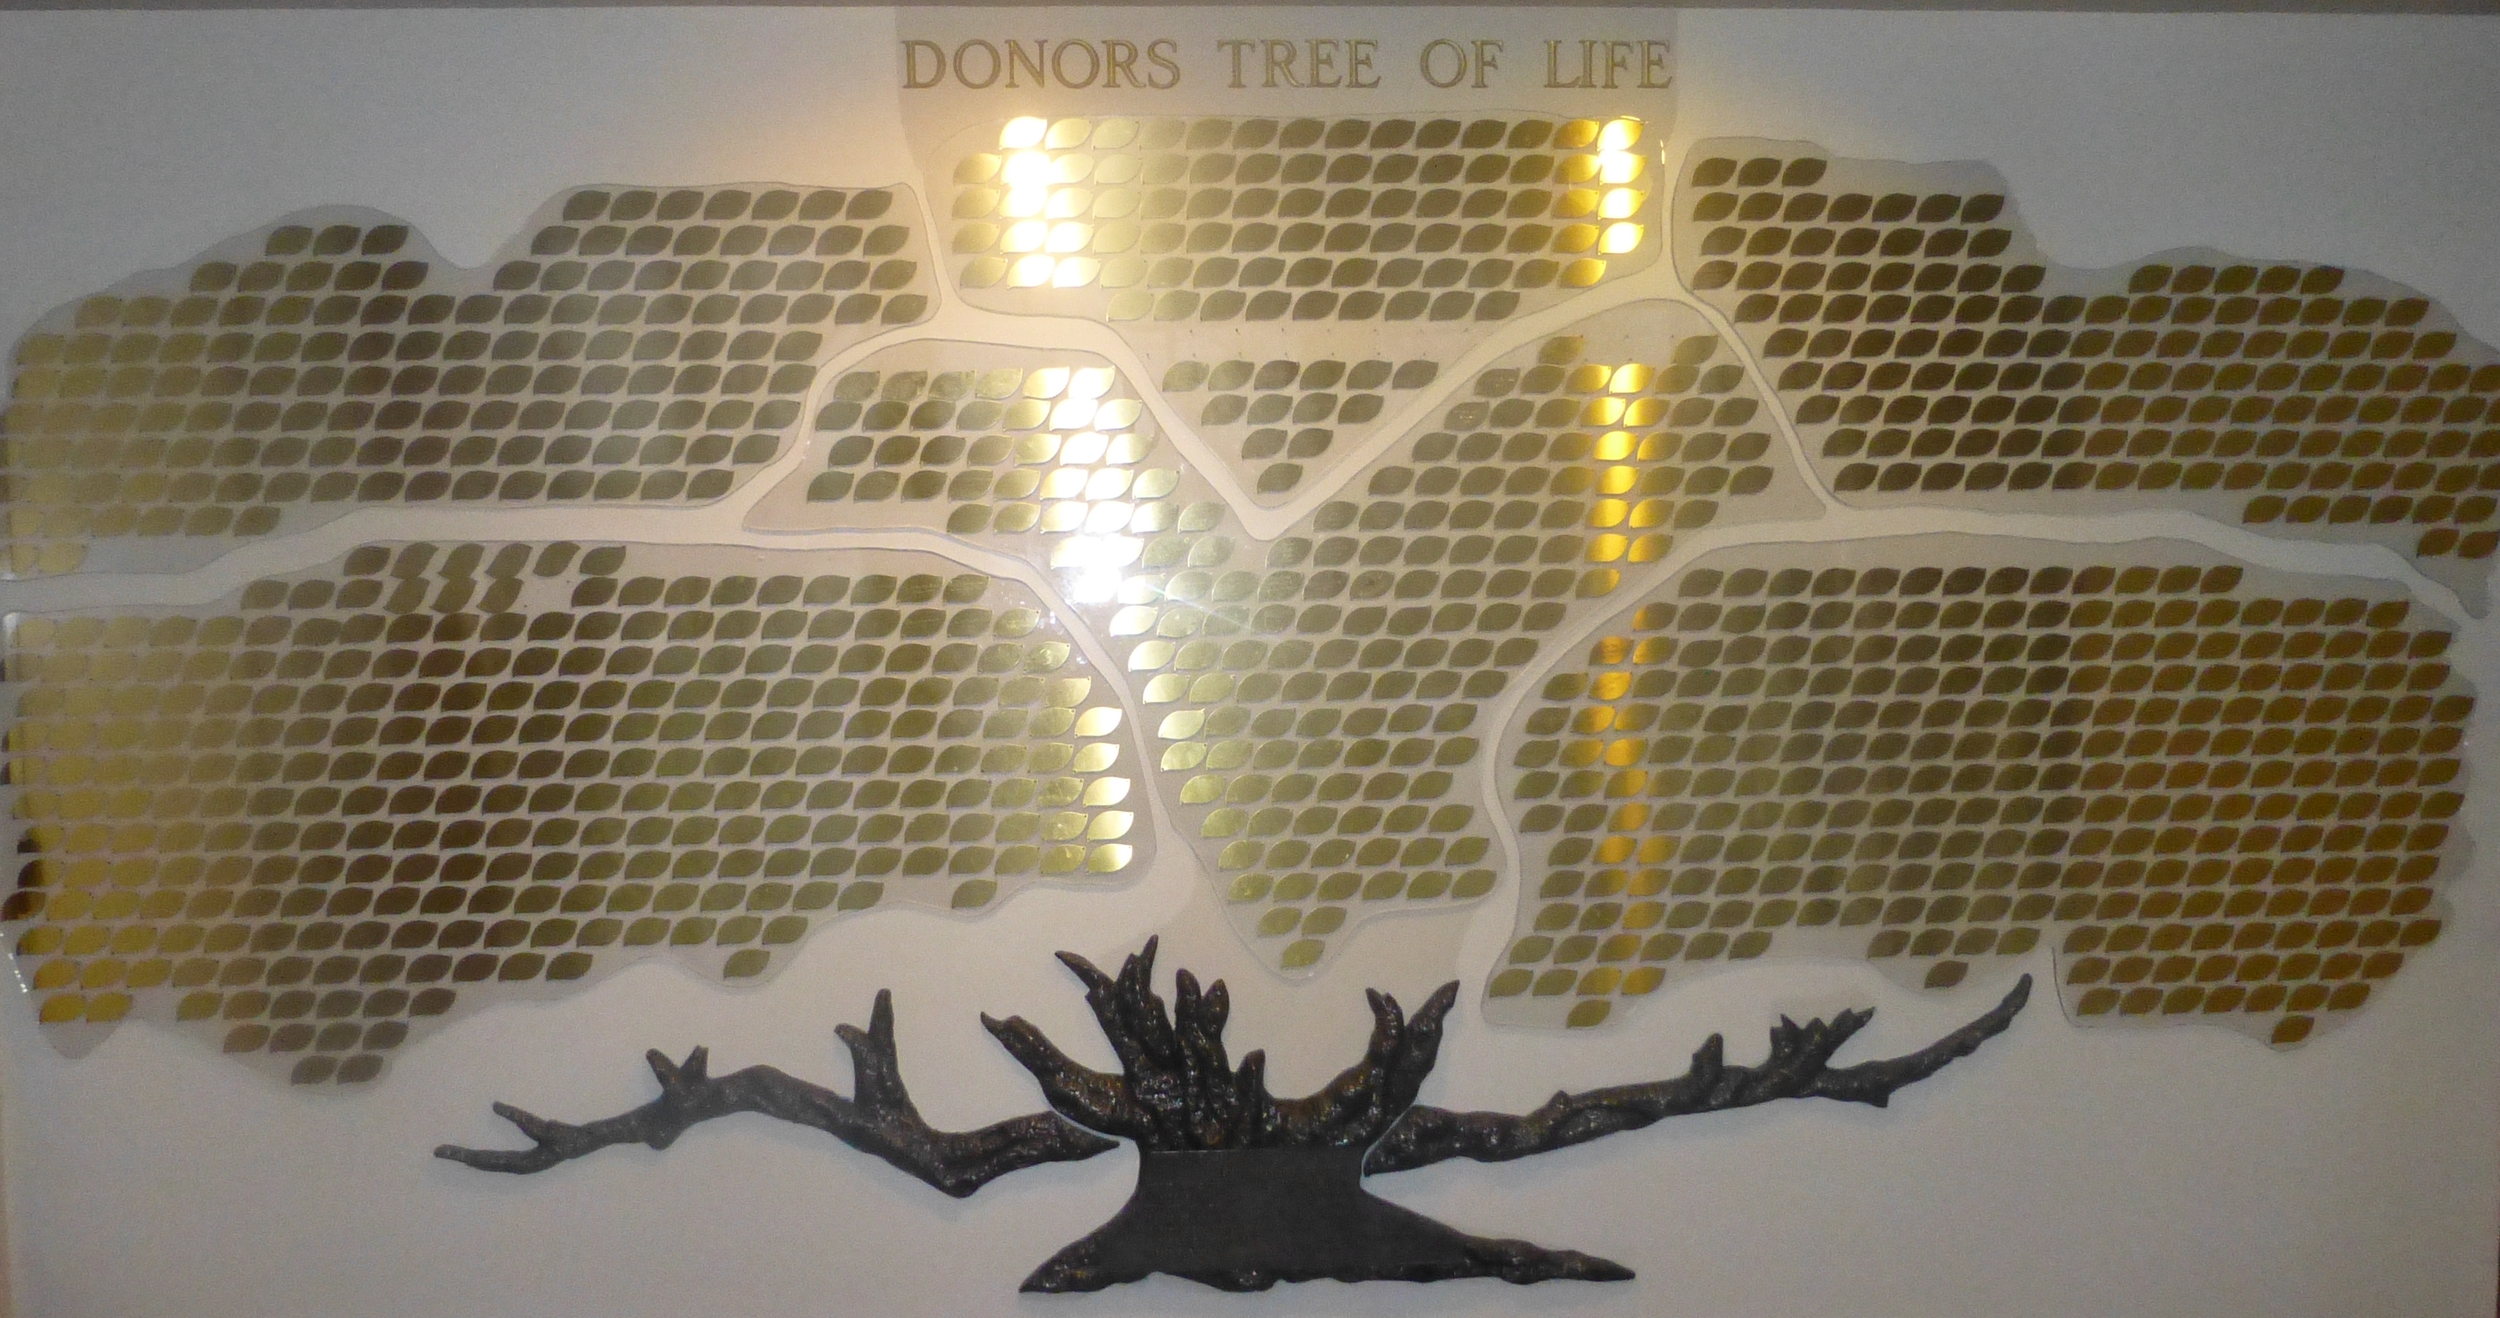 Donors Tree of Life.JPG